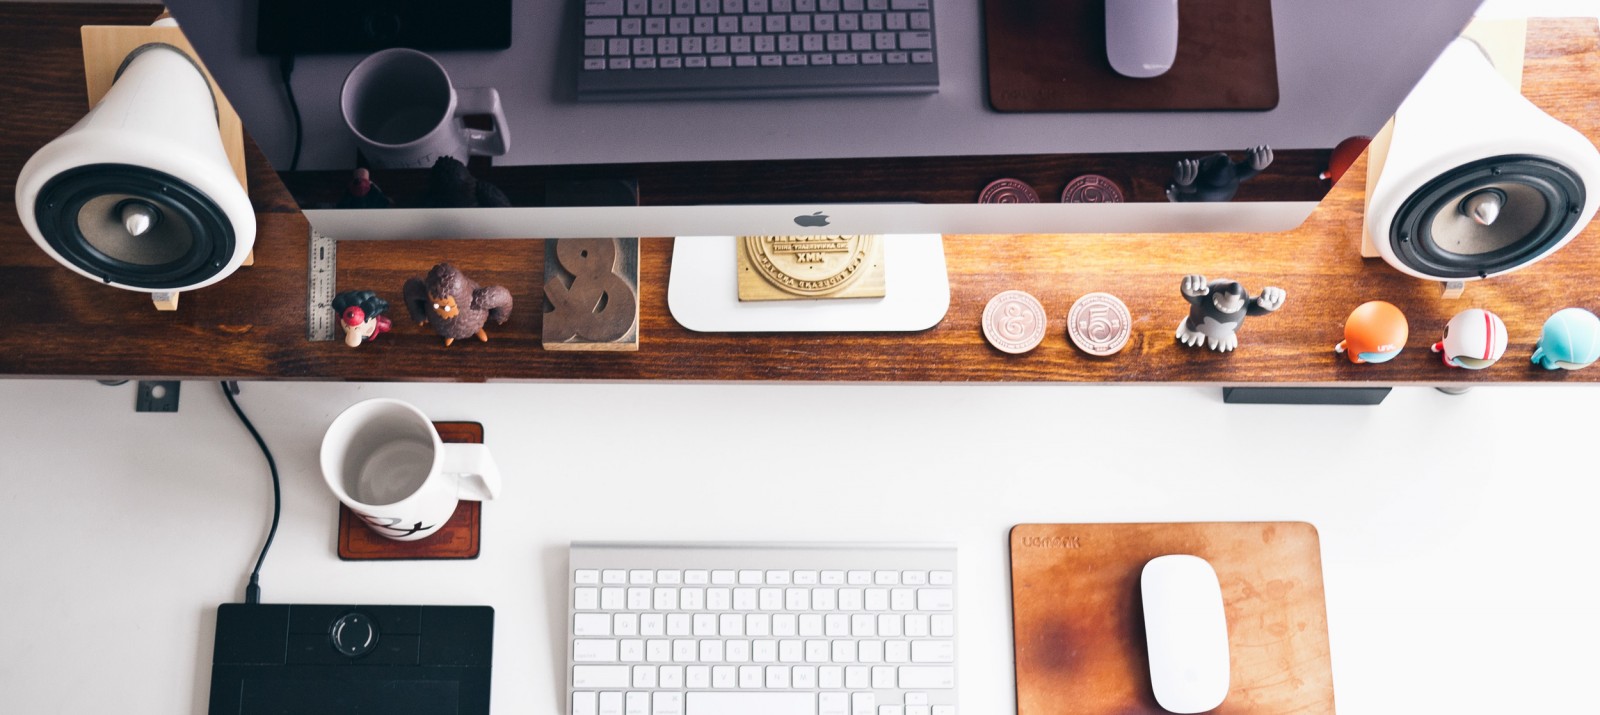 Five ways to set up your desk for productivity